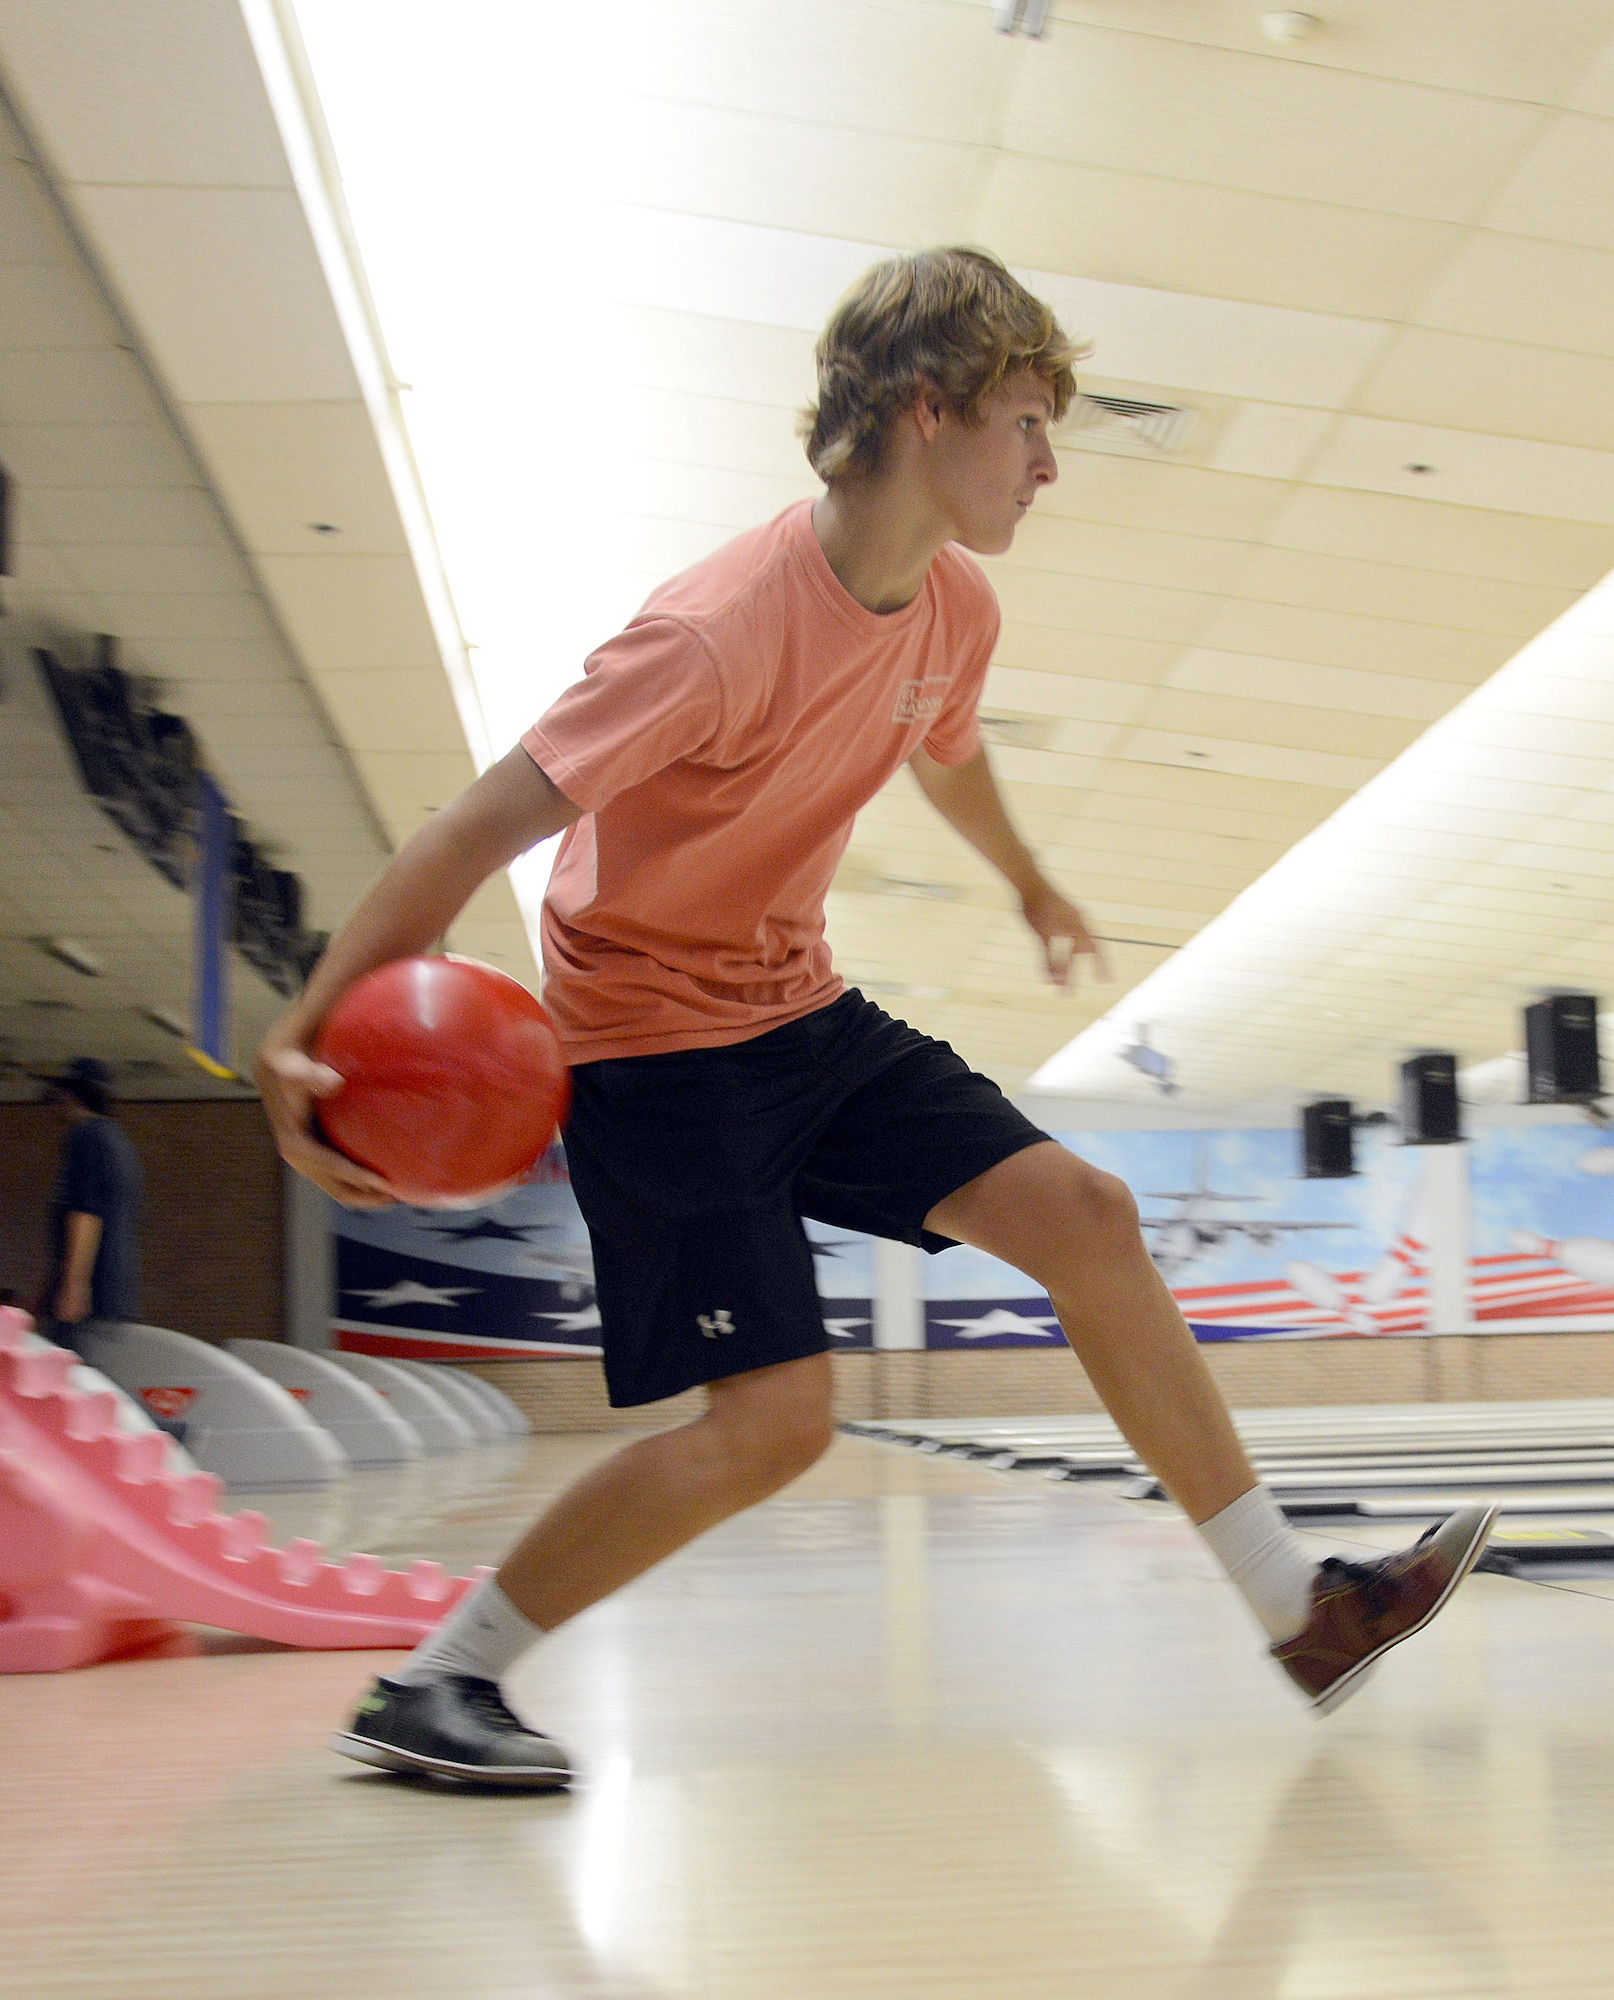 Josh Heyen, 15, enjoys an afternoon of bowling at Robins Lanes. The bowling center is available to all active duty, retirees and their family members, Department of Defense civilians and their family members, DOD contractors and technical representatives, and guests accompanied by authorized individuals. 
 (U.S. Air Force photo by Tommie Horton)